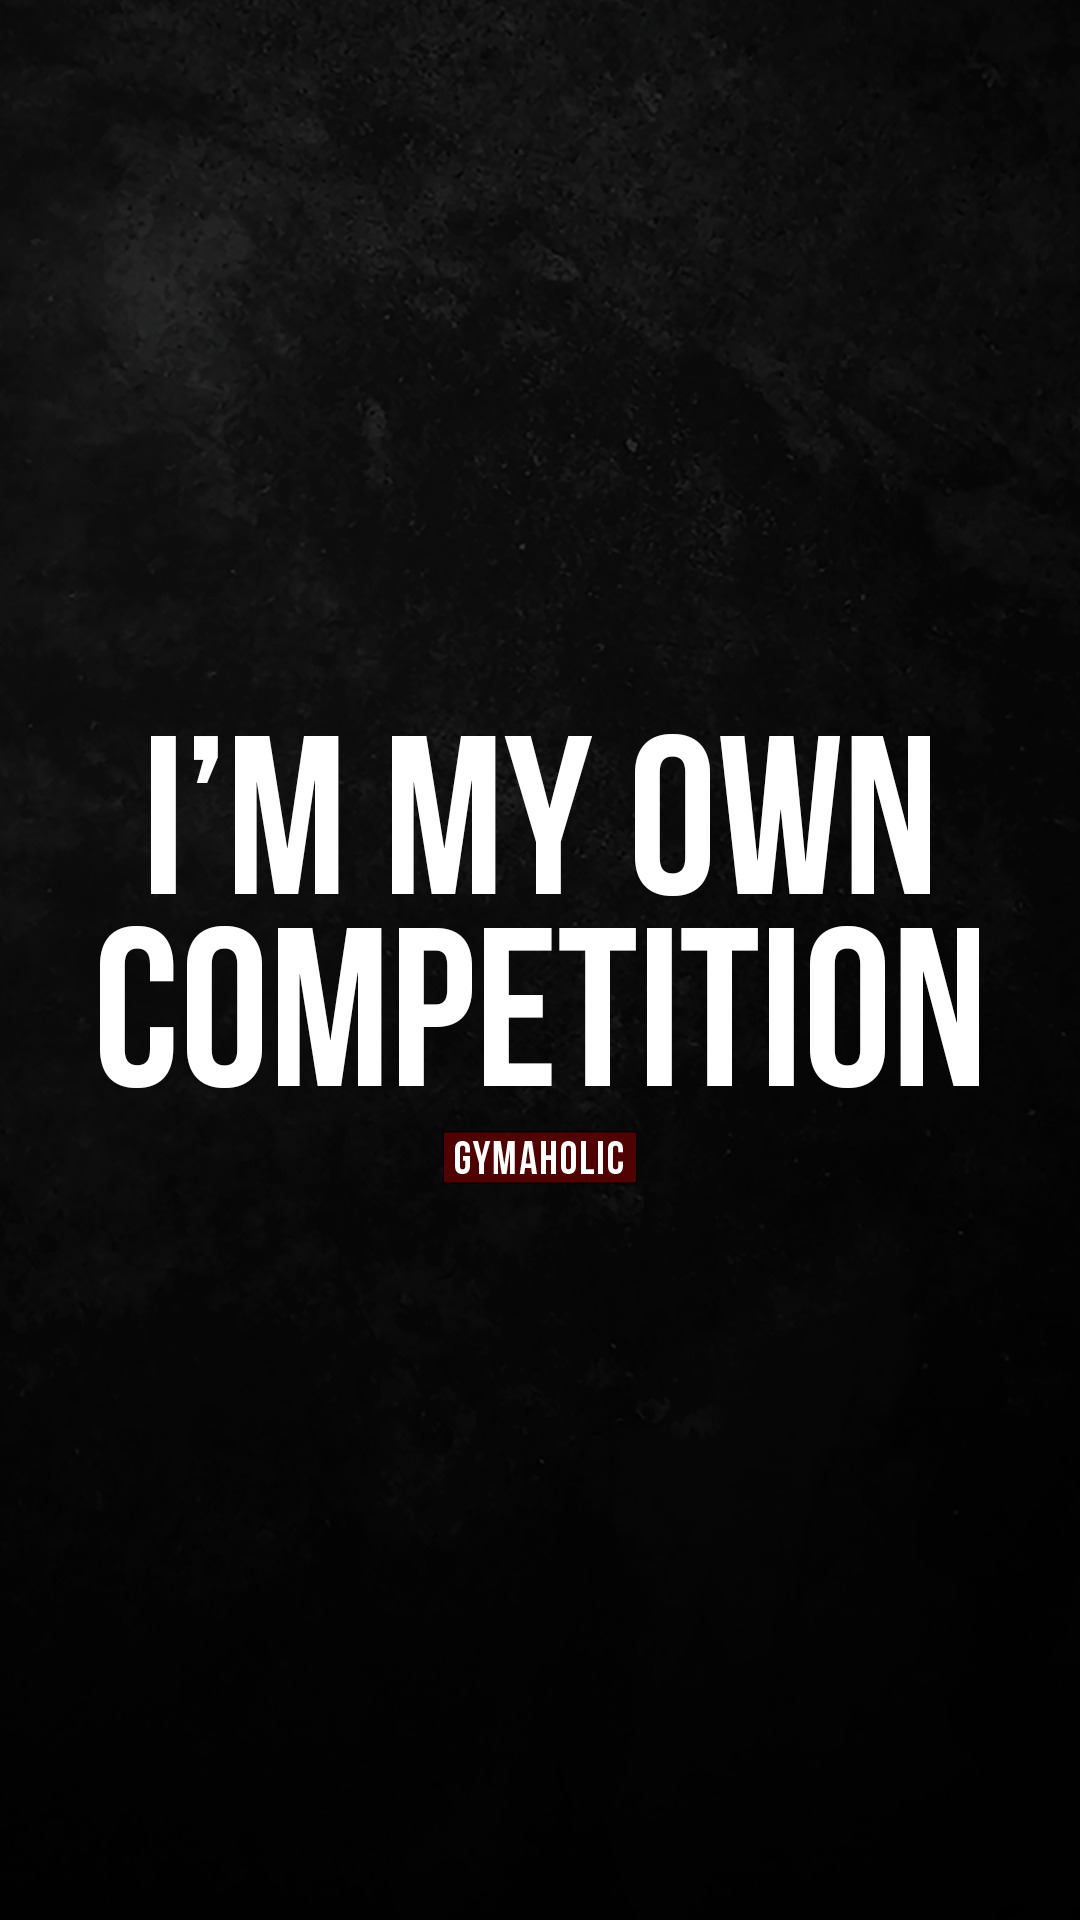 I’m my own competition